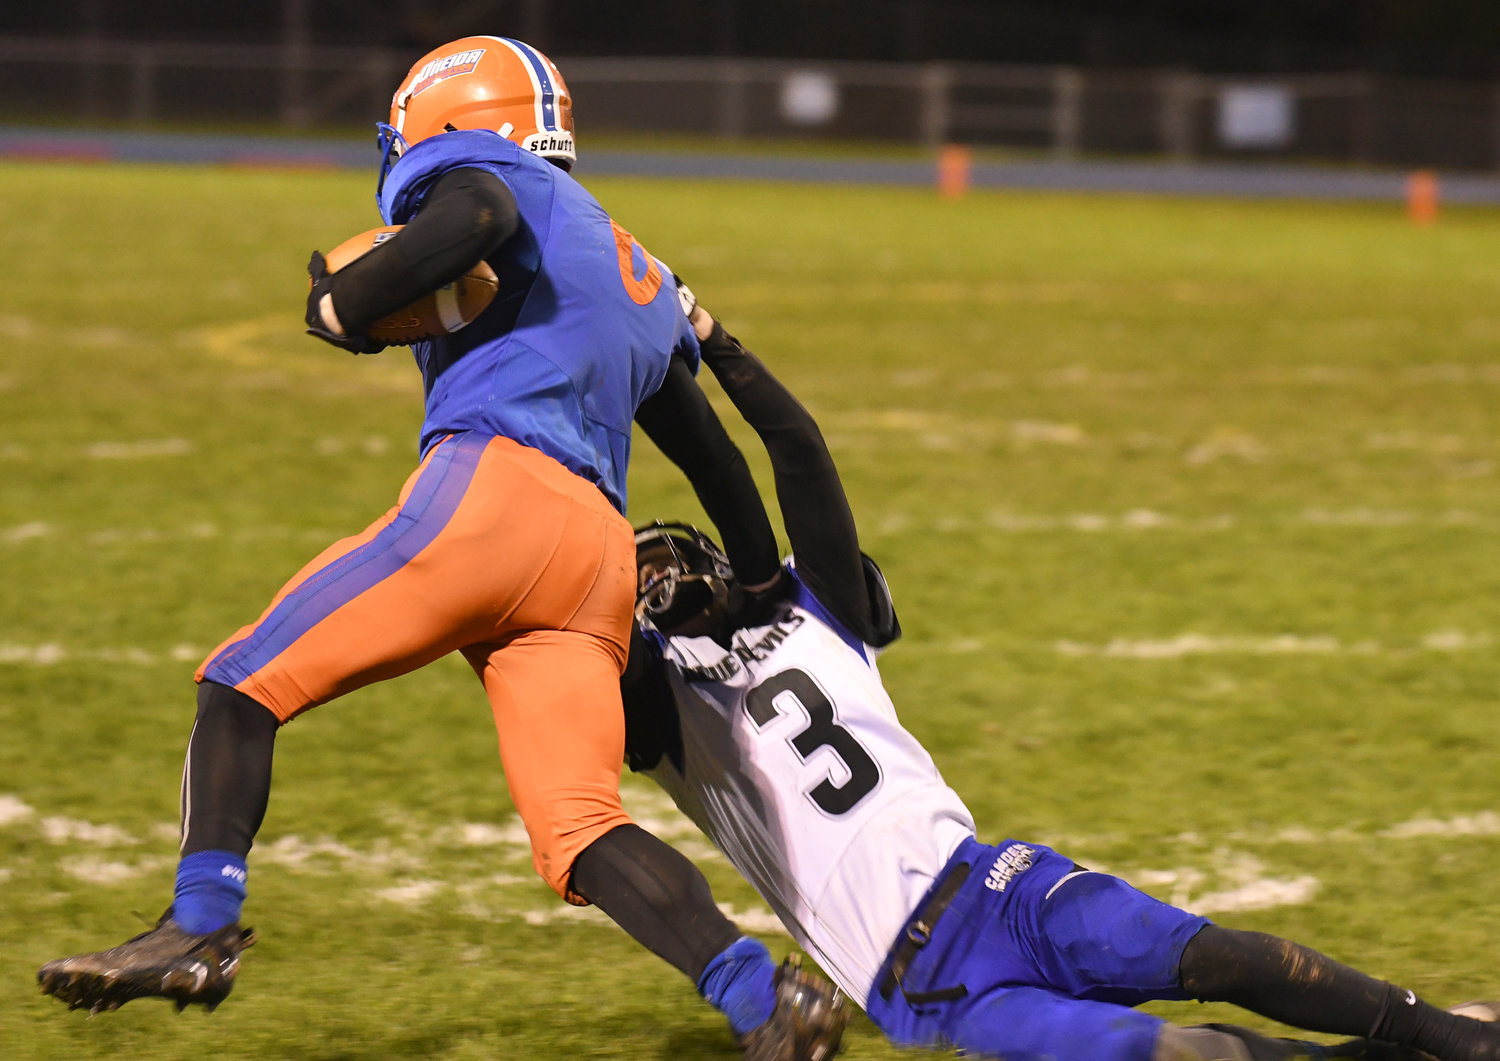 Oneida's Pierce Relyea Jr. sheds Camden's Trey O'Rourke after making an interception in the first quarter Friday night in Oneida.